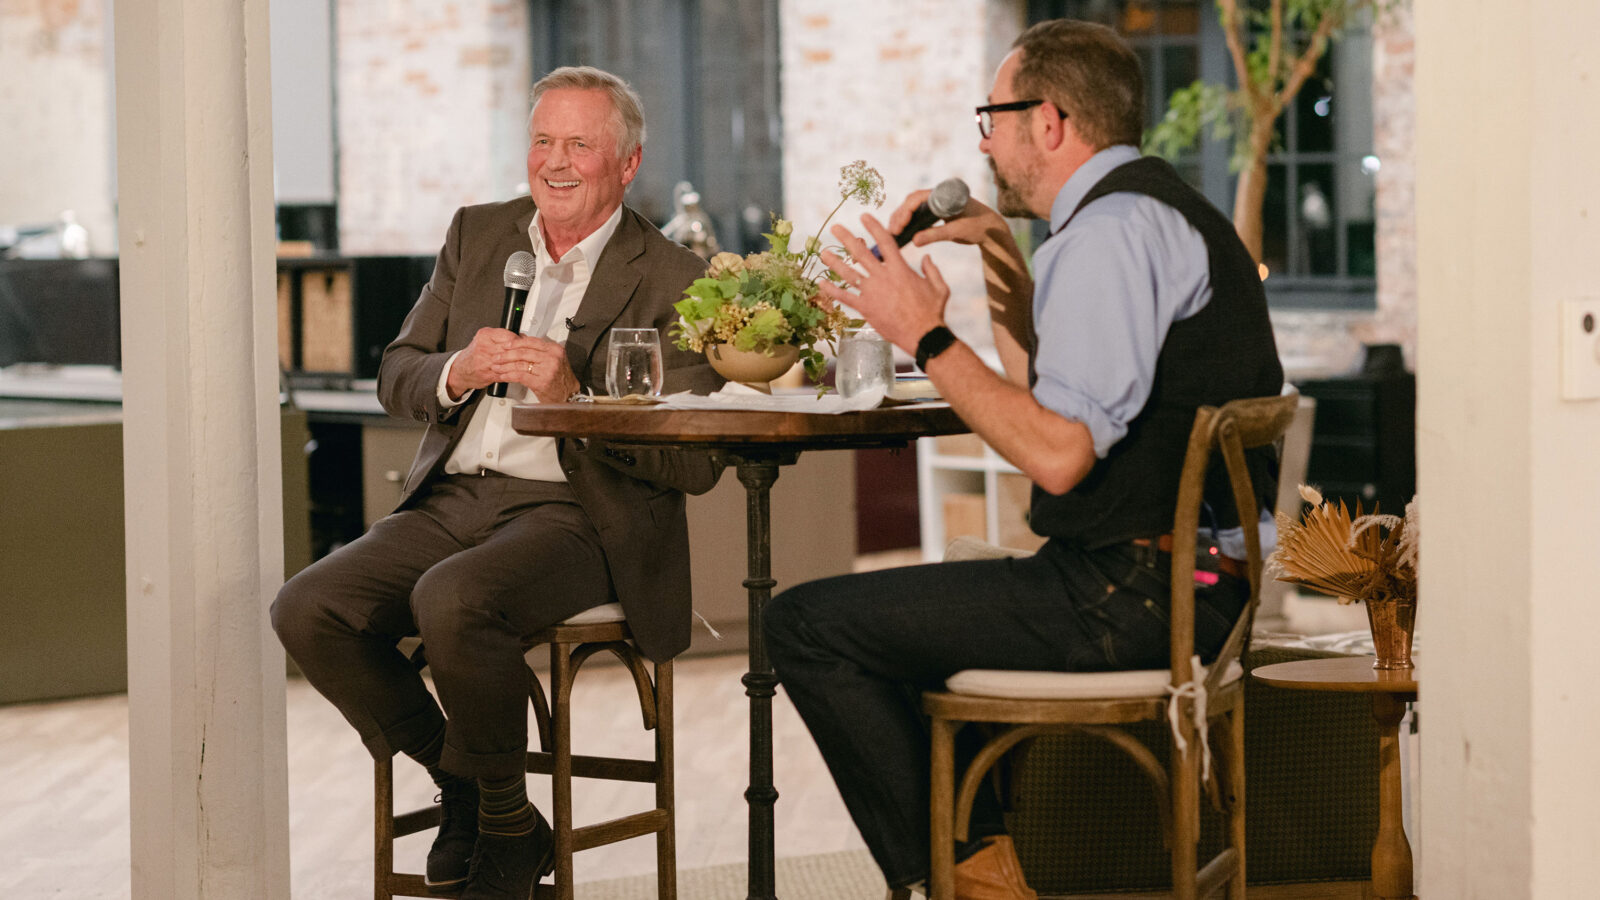 John Grisham and Jonathan Miles hold microphones while sitting next to each other at a table